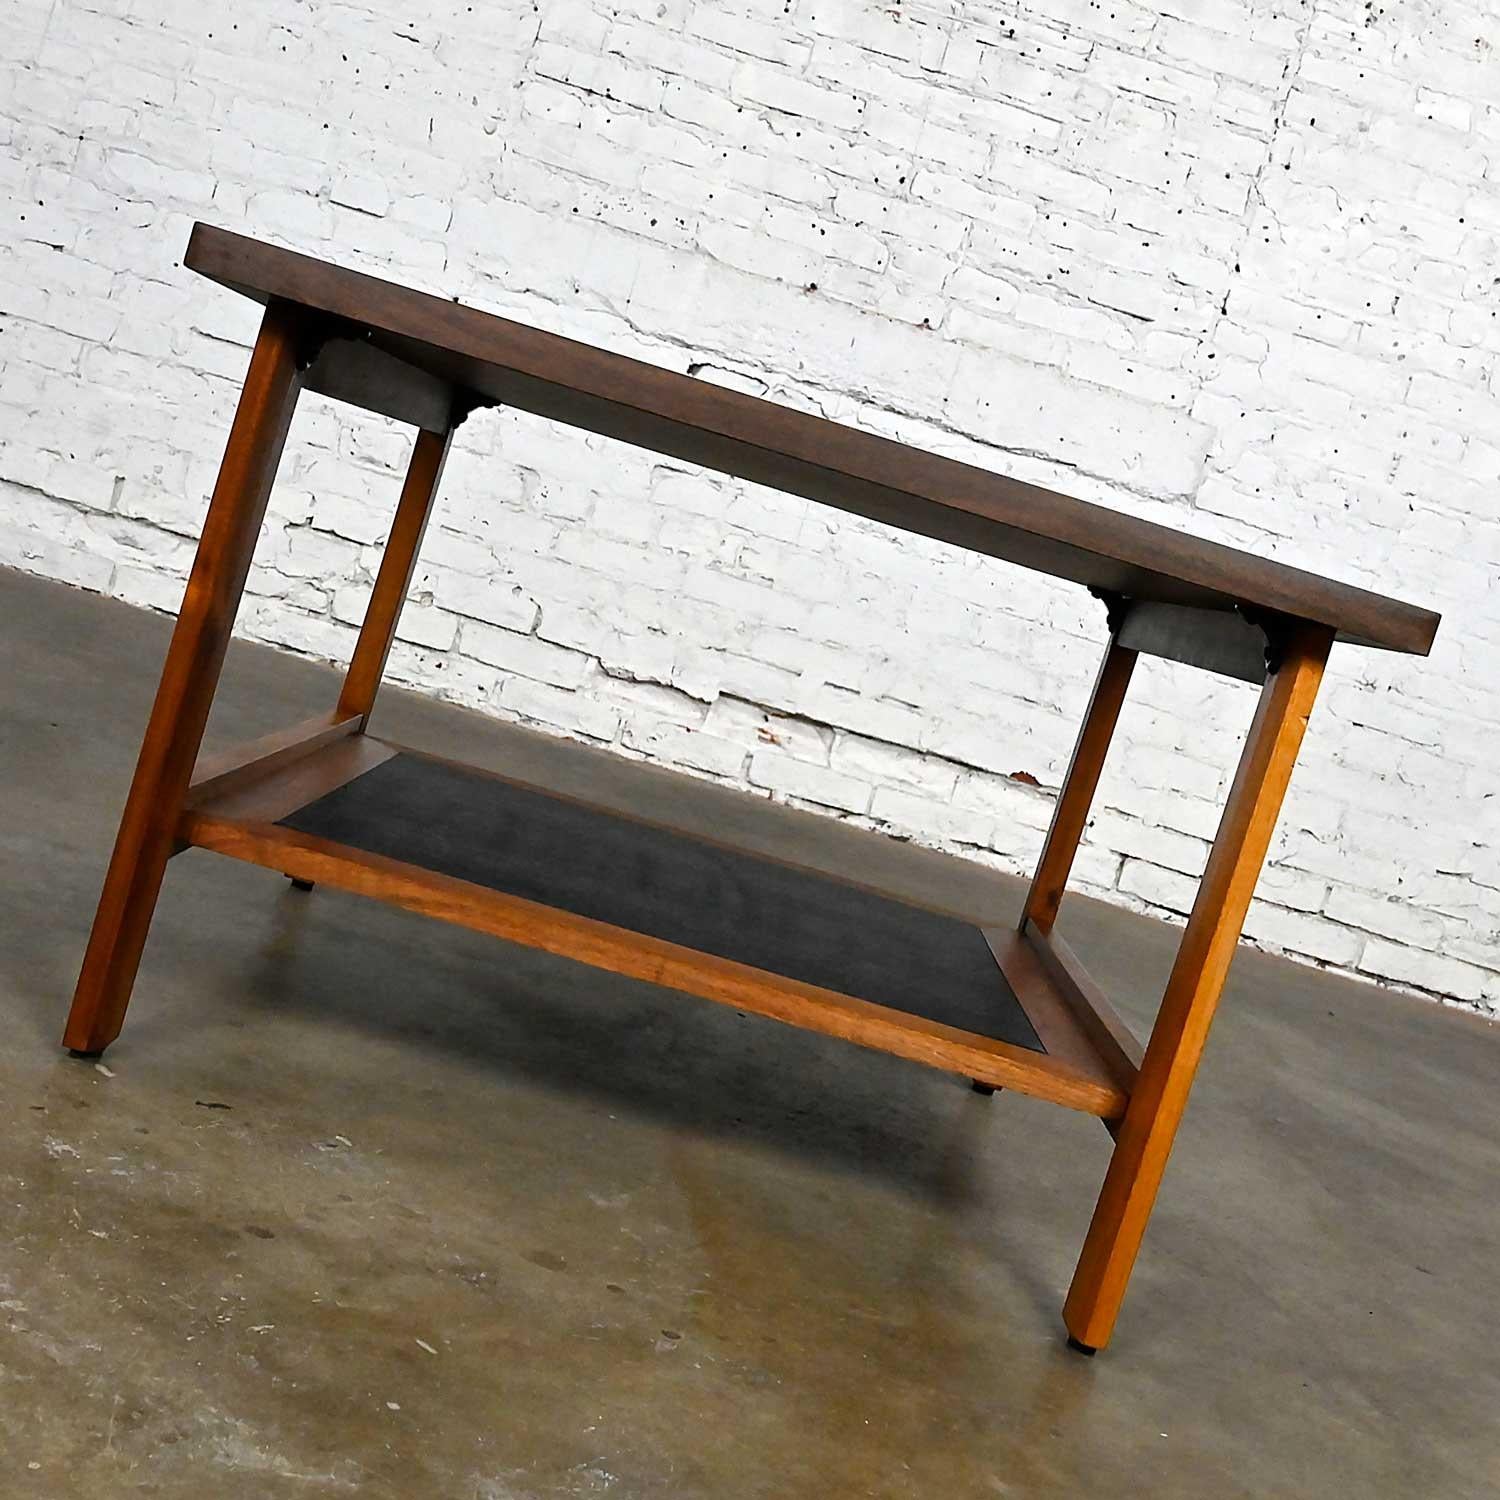 20th Century MCM Square Walnut End Table Lower Shelf Black Faux Leather Insert Laminate Top For Sale